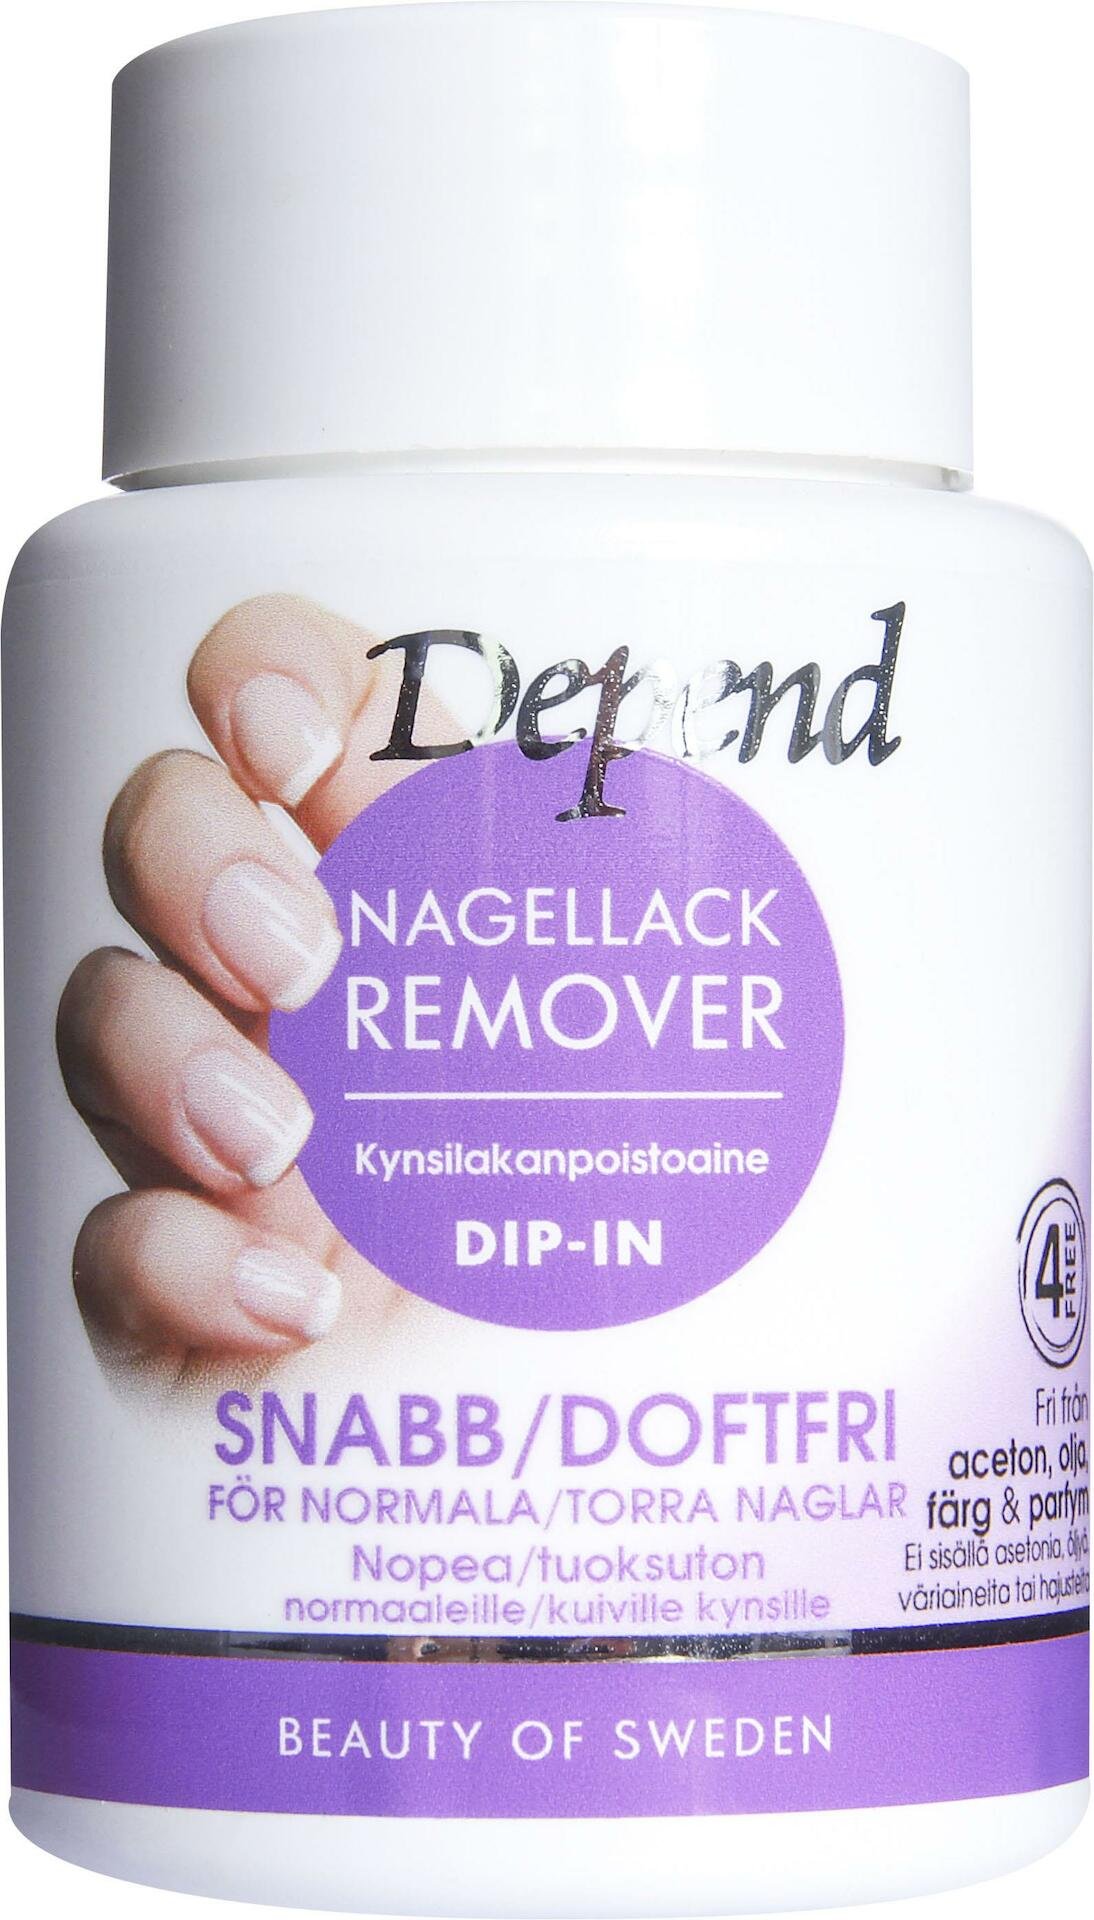 Depend Remover Dip-in lila 75ml